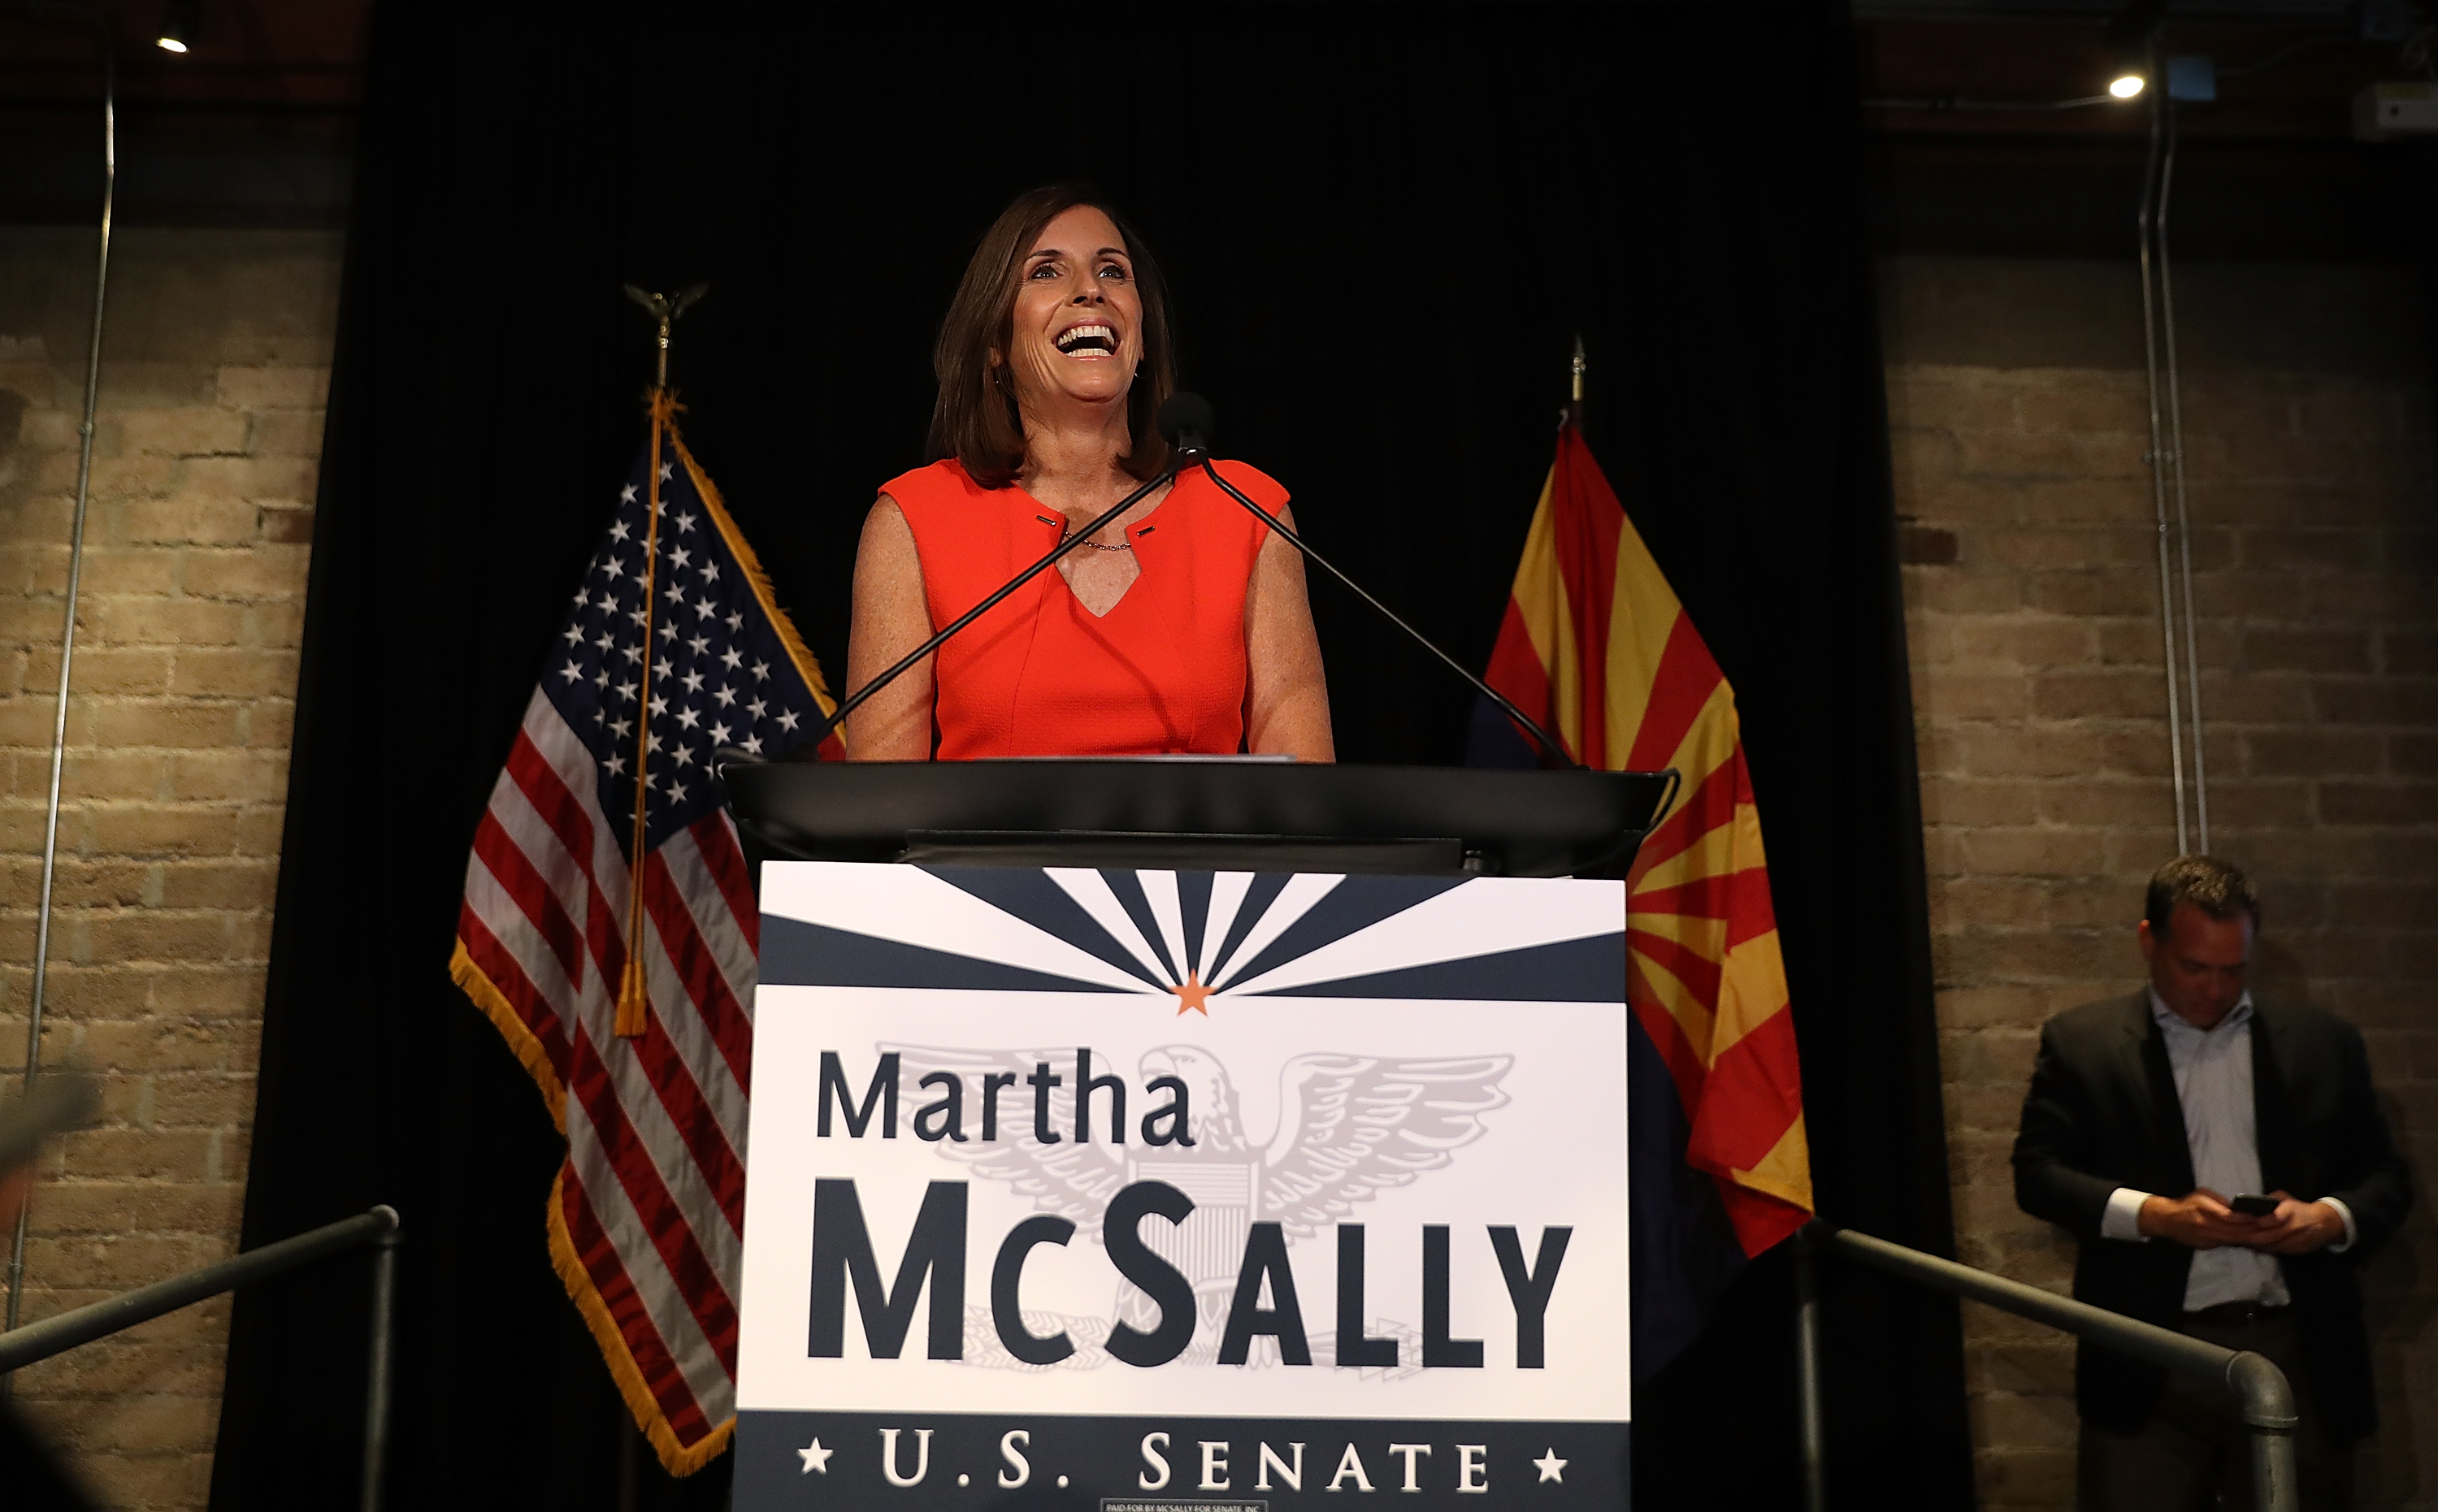 TEMPE, AZ - AUGUST 28: U.S. Senate candidate U.S. Rep. Martha McSally (R-AZ) speaks during her primary election night gathering at Culinary Drop Out at The Yard on August 28, 2018 in Tempe, Arizona. U.S. Rep. Martha McSally won the Arizona GOP senate primary. (Photo by Justin Sullivan/Getty Images)